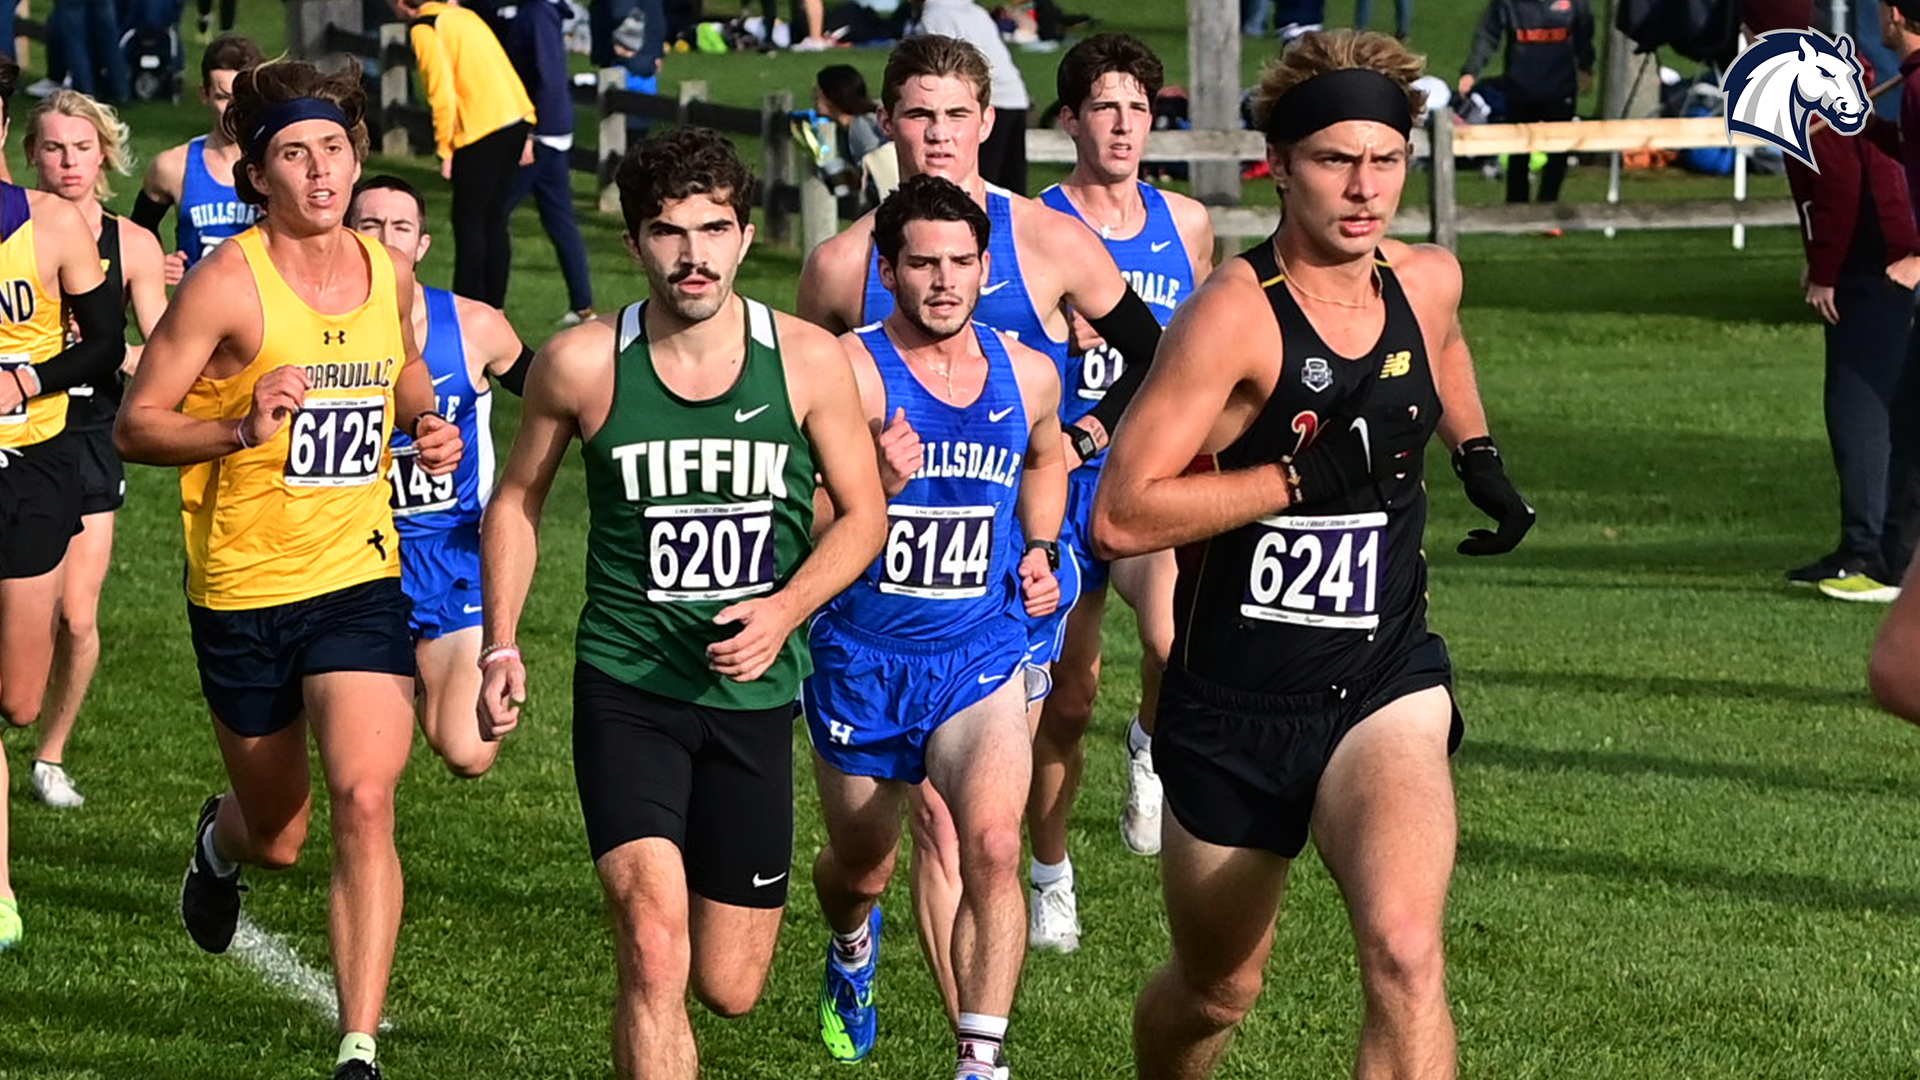 Charger men kick off 2022 campaign with competition at Olivet College Comet Open